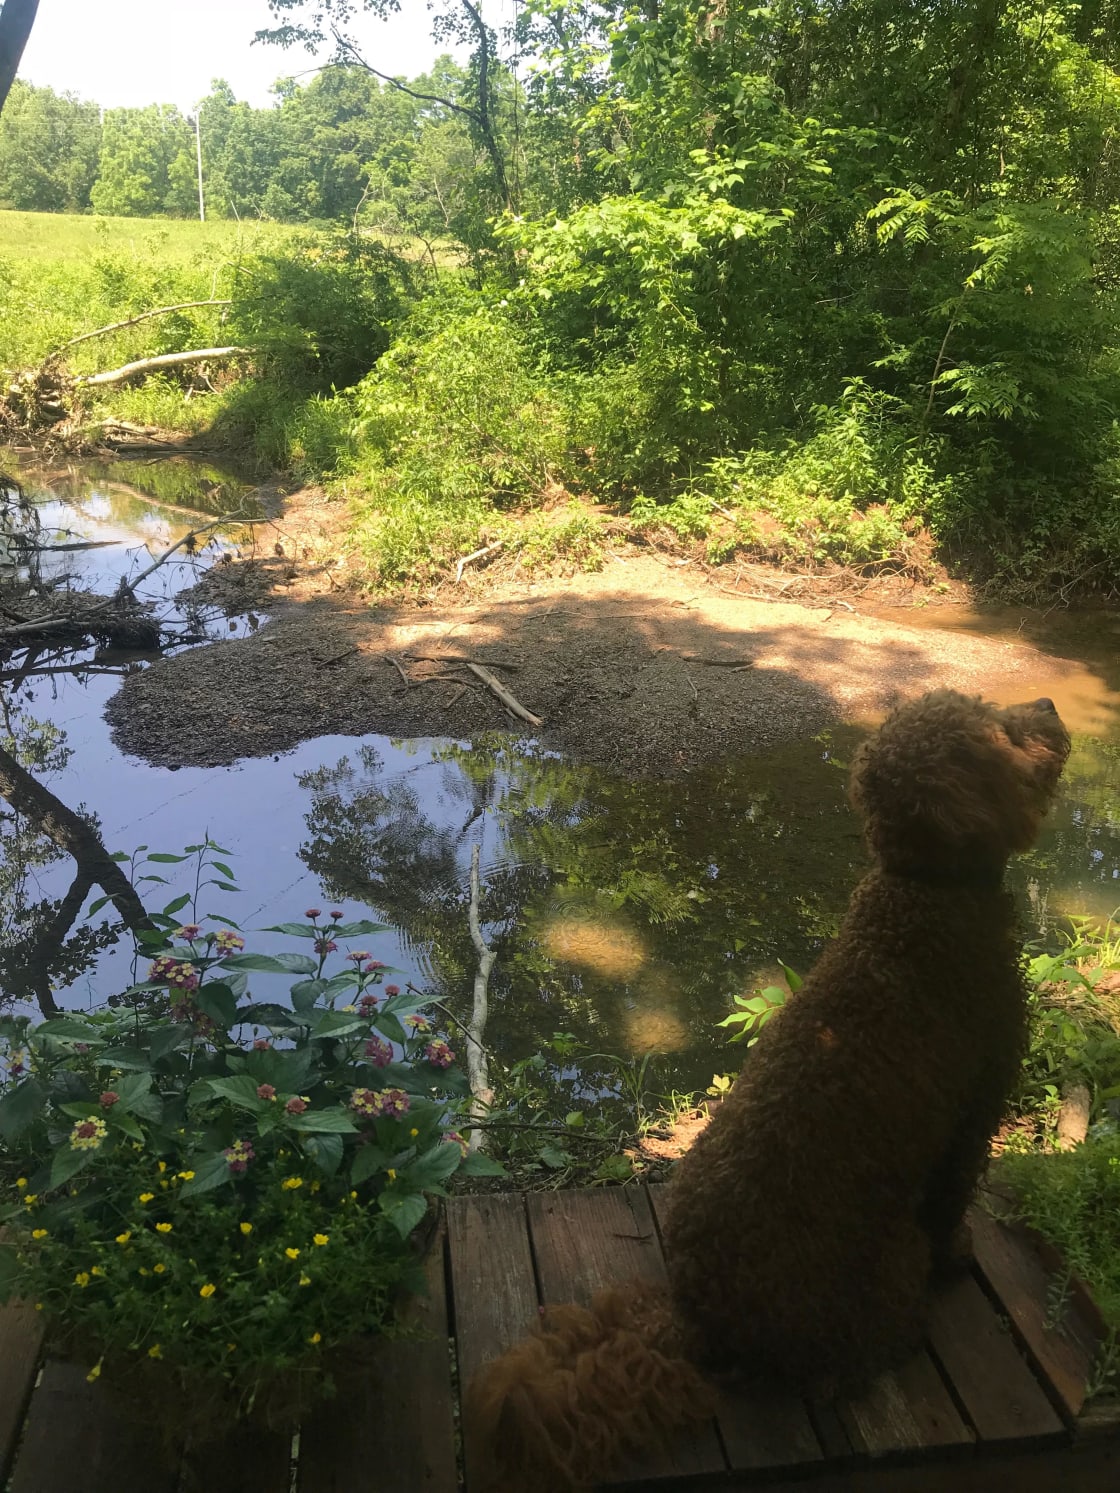 Chester taking in the creek!